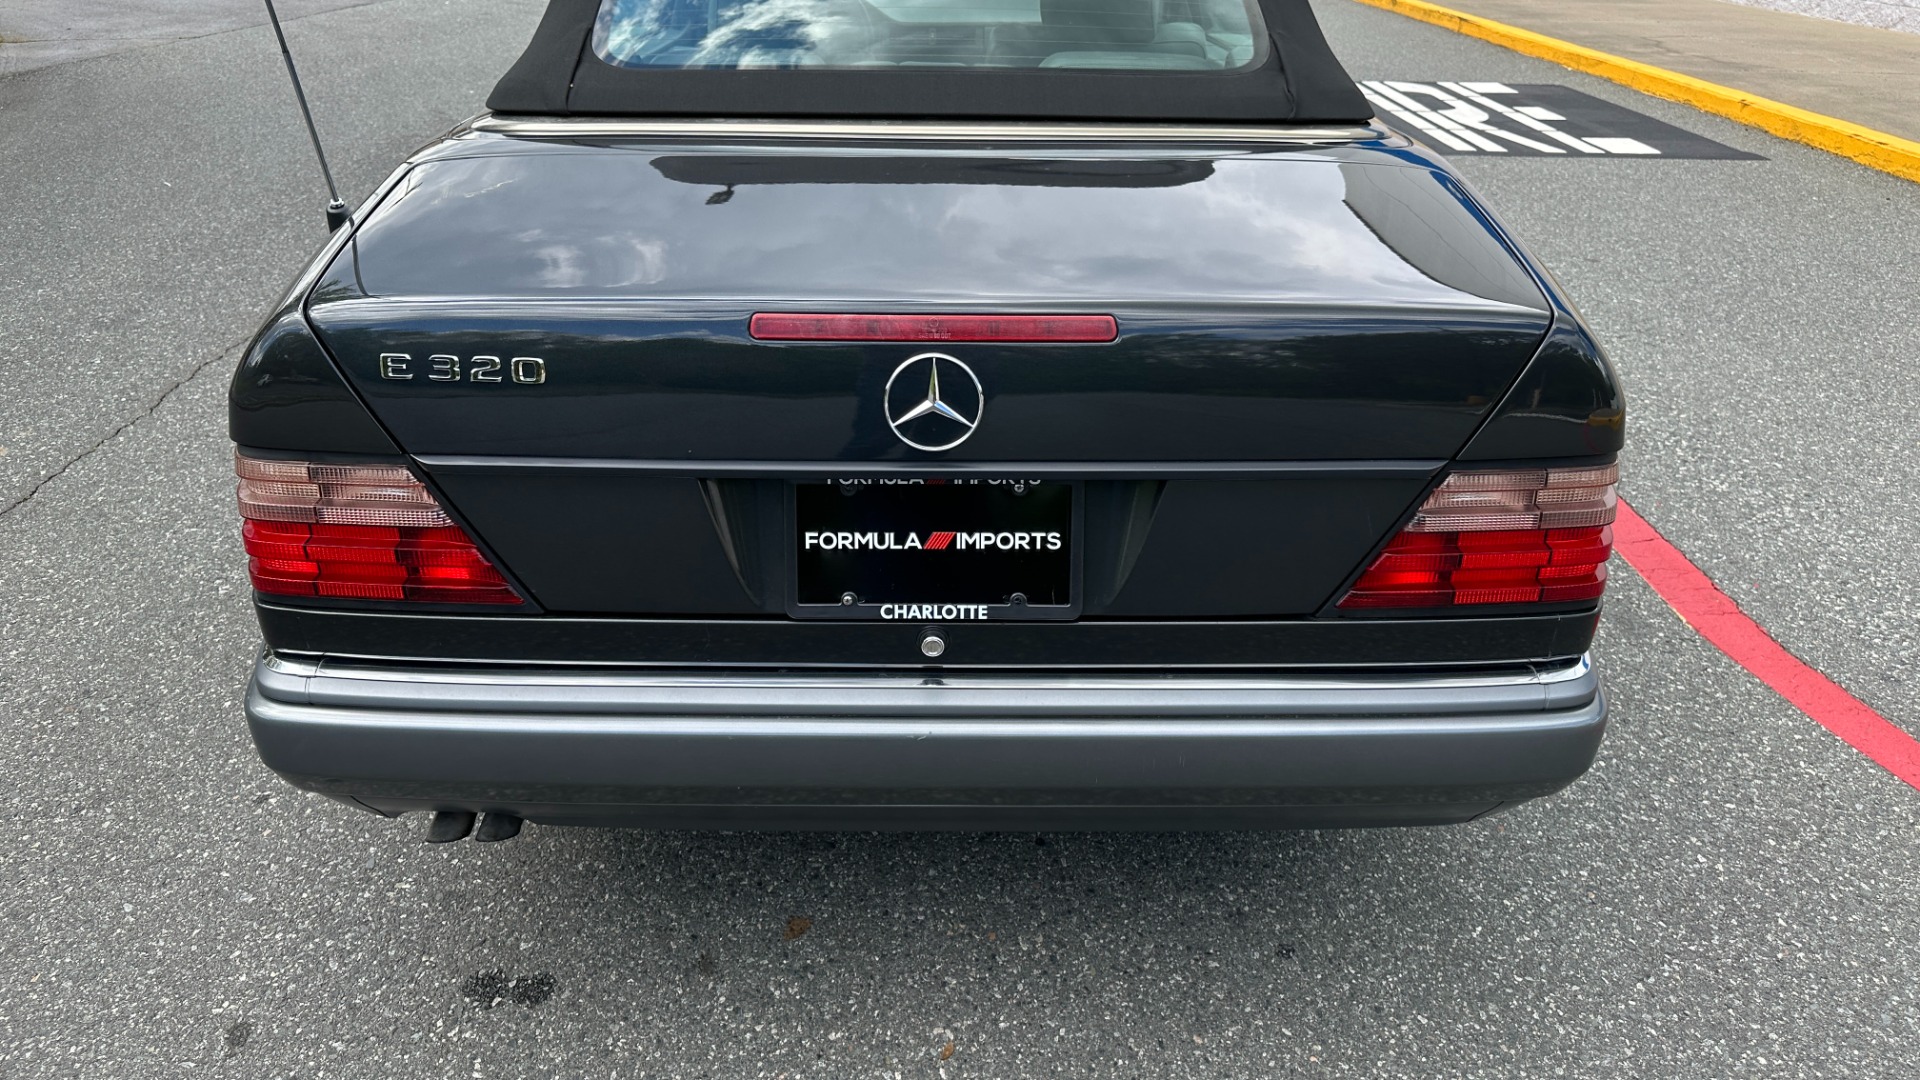 Used 1994 Mercedes-Benz 300 Series E 320 / CONVERTIBLE / MEMORY / POWER TOP / INLINE 6CYL / LEATHER for sale $23,500 at Formula Imports in Charlotte NC 28227 10